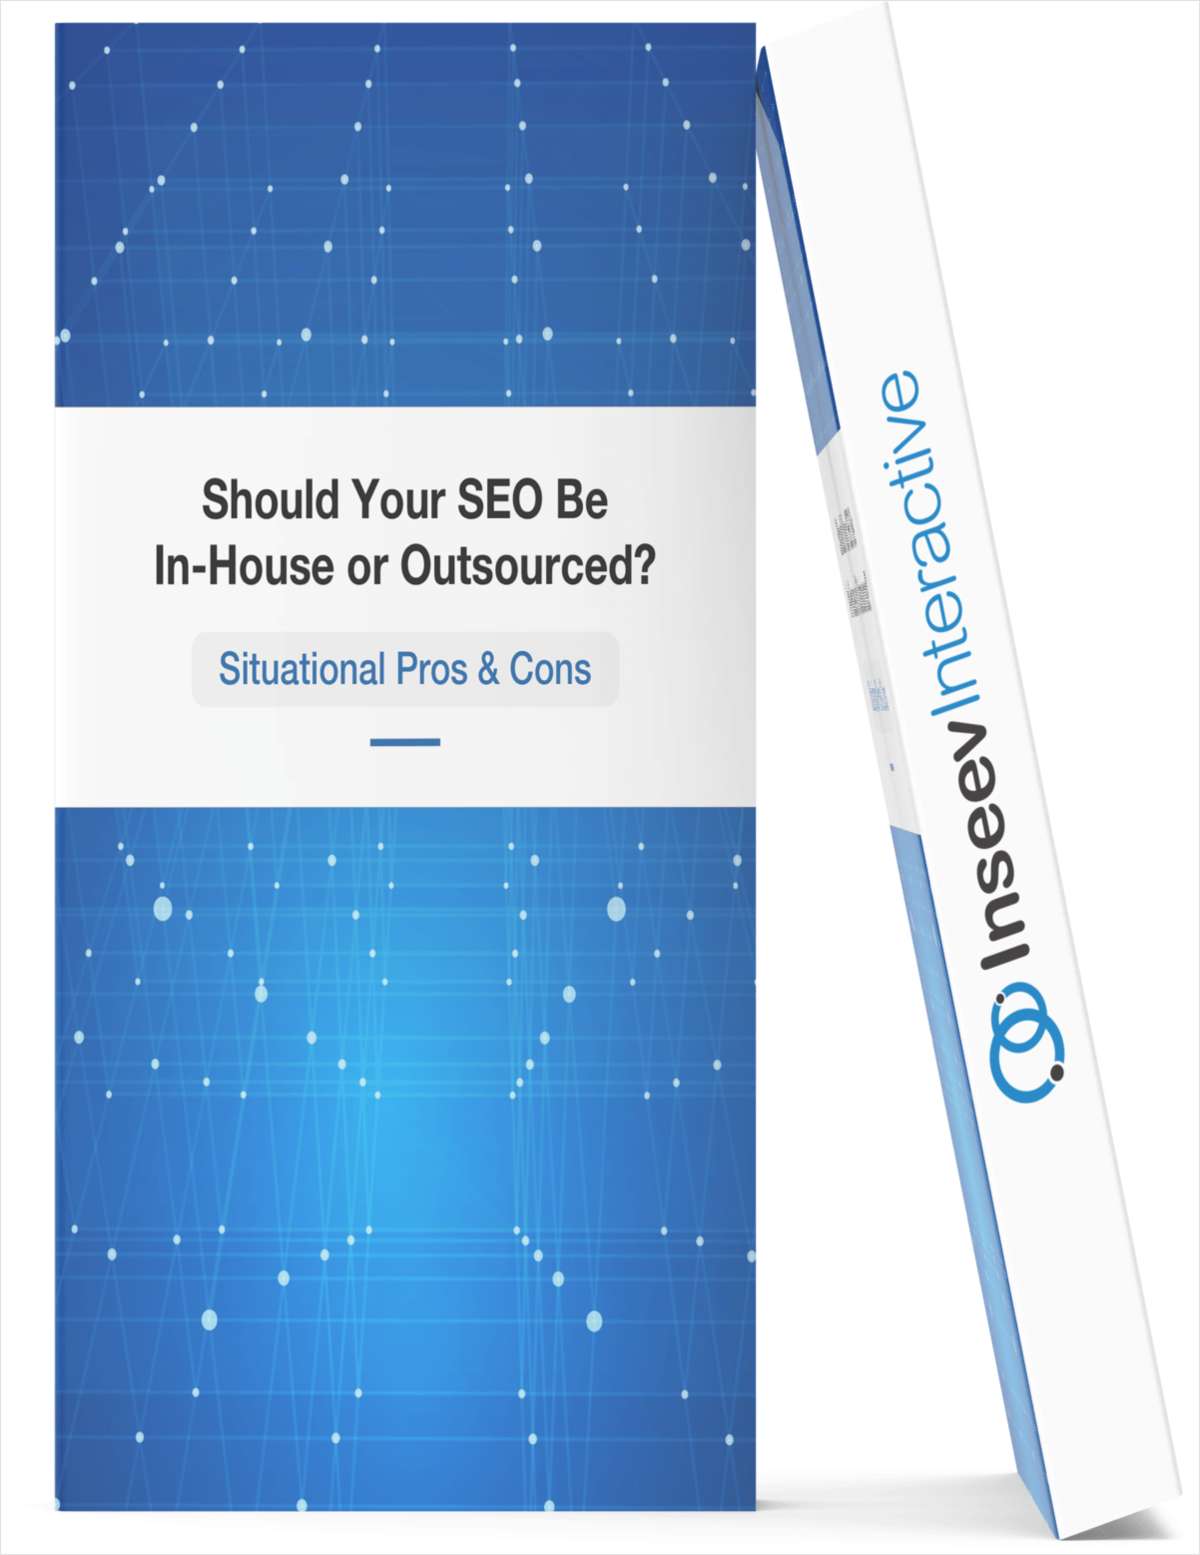 Should Your SEO Be In-House or Outsourced?